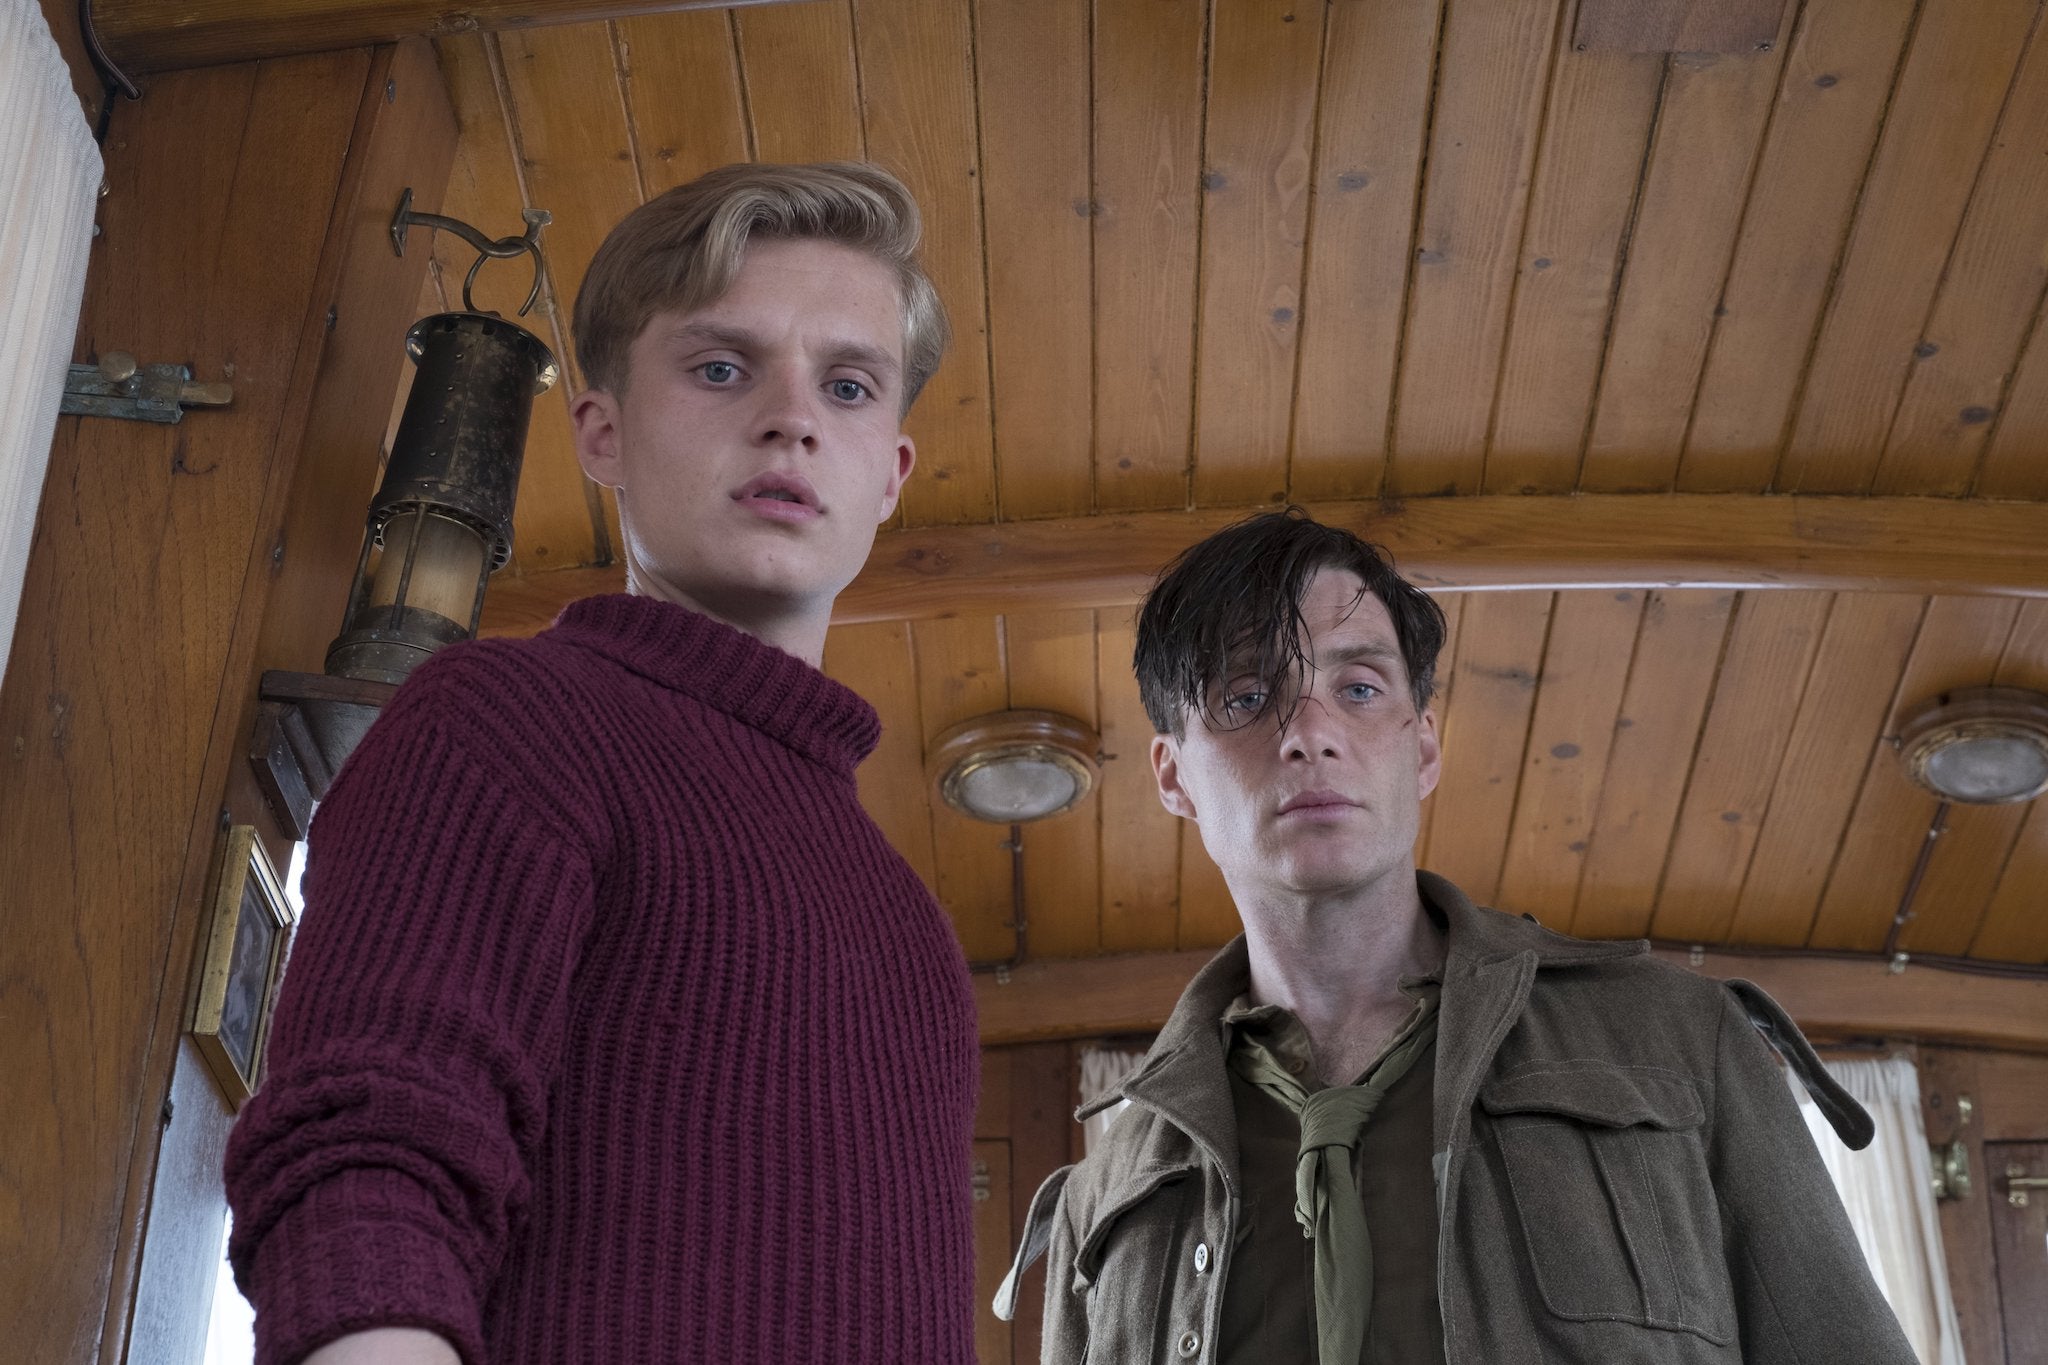 Glynn-Carney and Cillian Murphy in Christopher Nolan’s wartime epic ‘Dunkirk’ (2017)